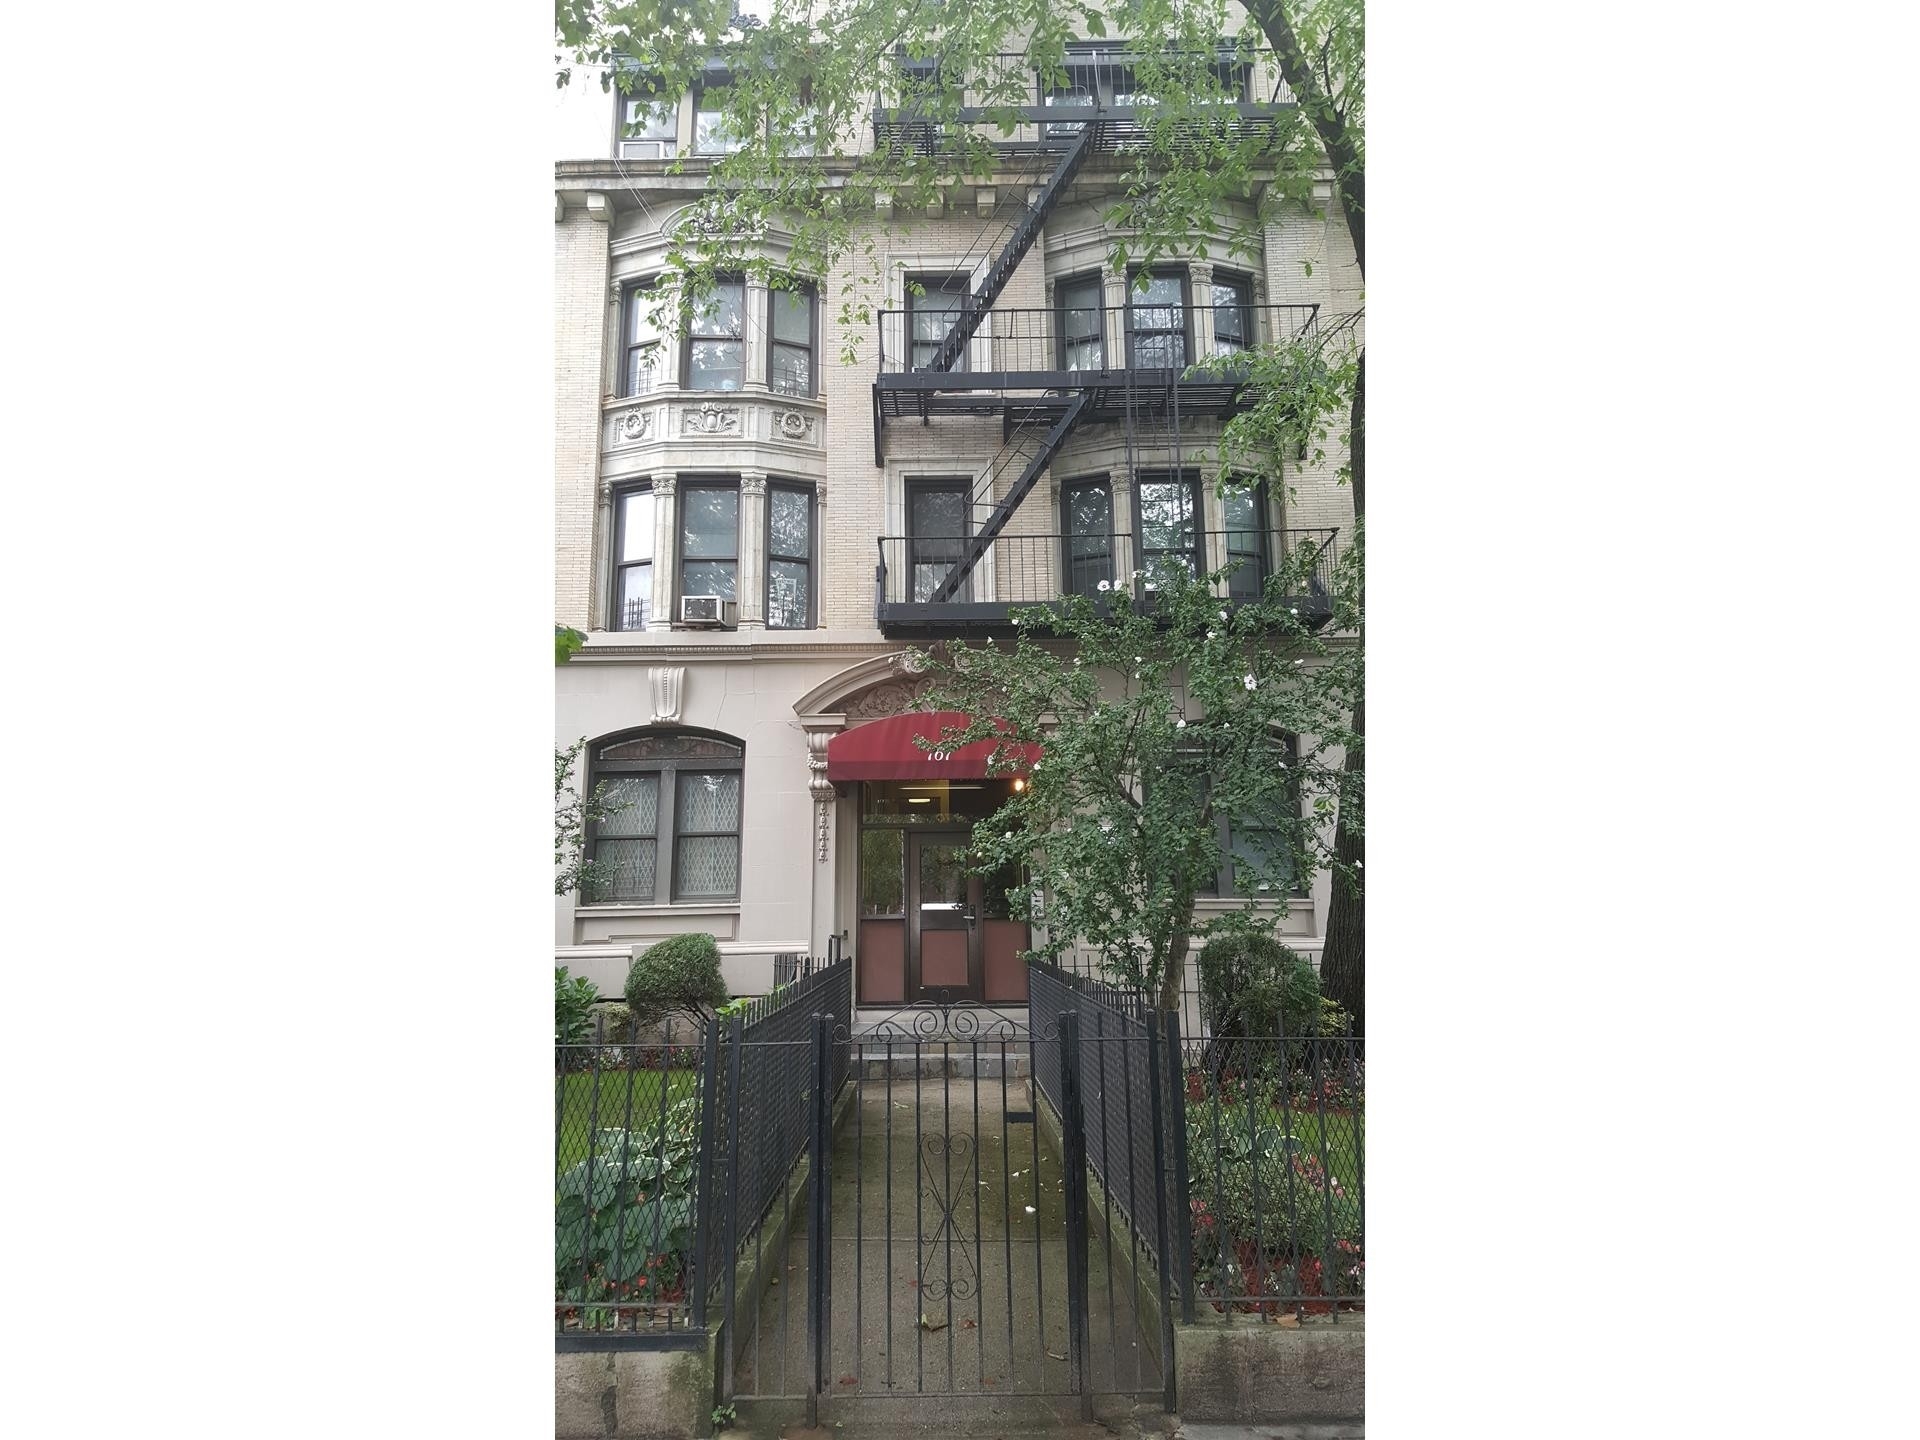 Co-op Properties for Sale at 767 EASTERN PKWY, 4B Crown Heights, Brooklyn, NY 11213